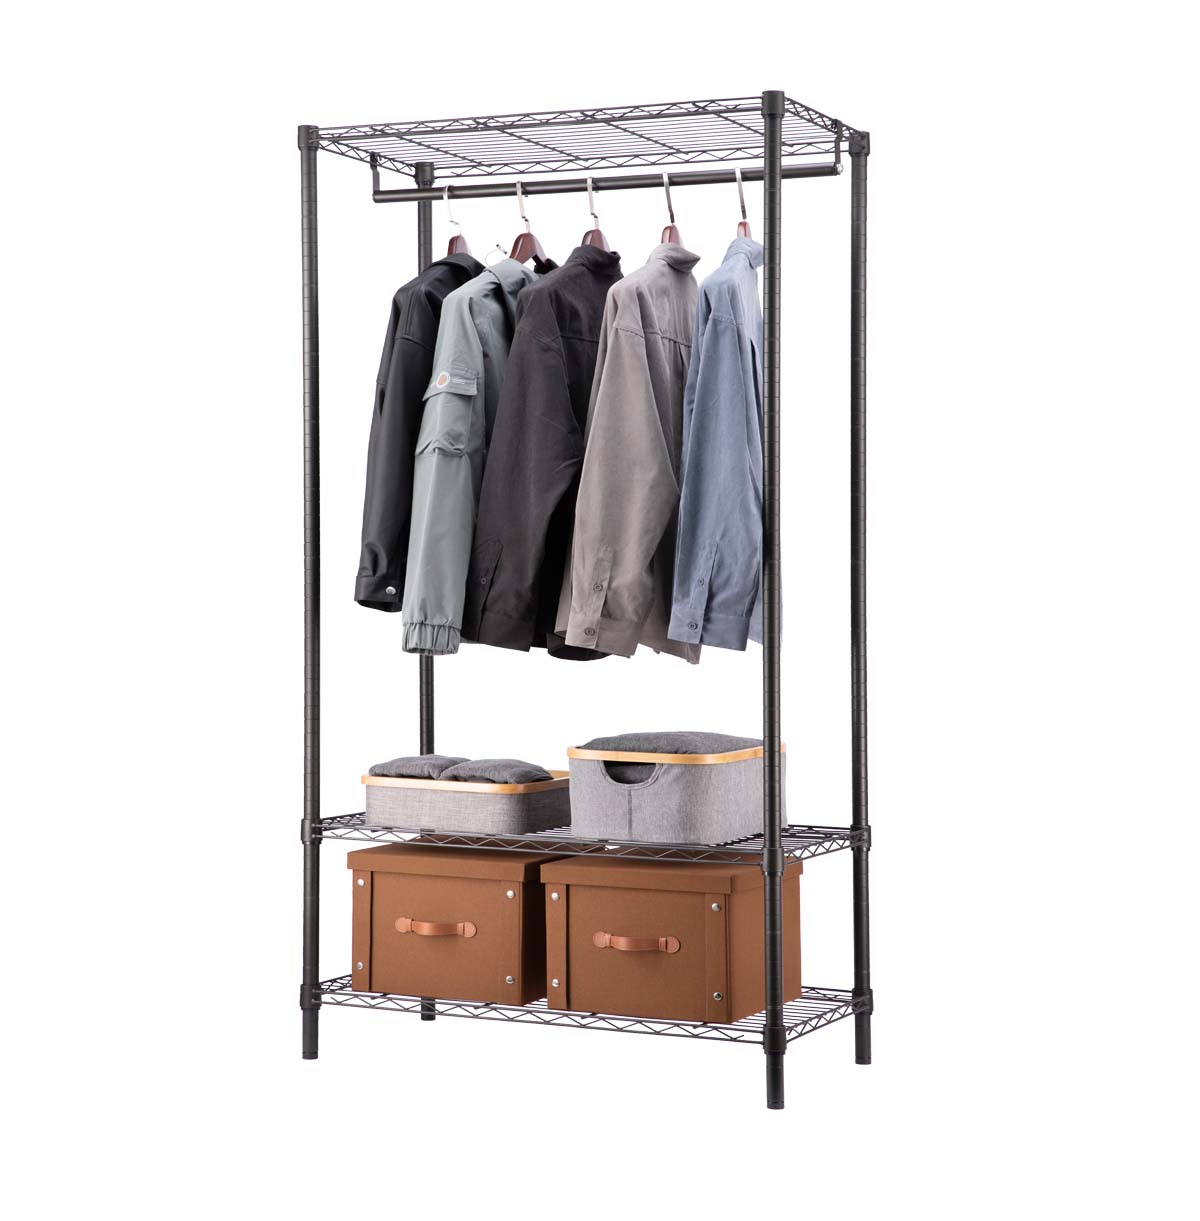 Heavy Duty Wire Garment Rack, Metal Clothing Rack with Hanging Rods / Freestanding Open Wardrobe Organizer